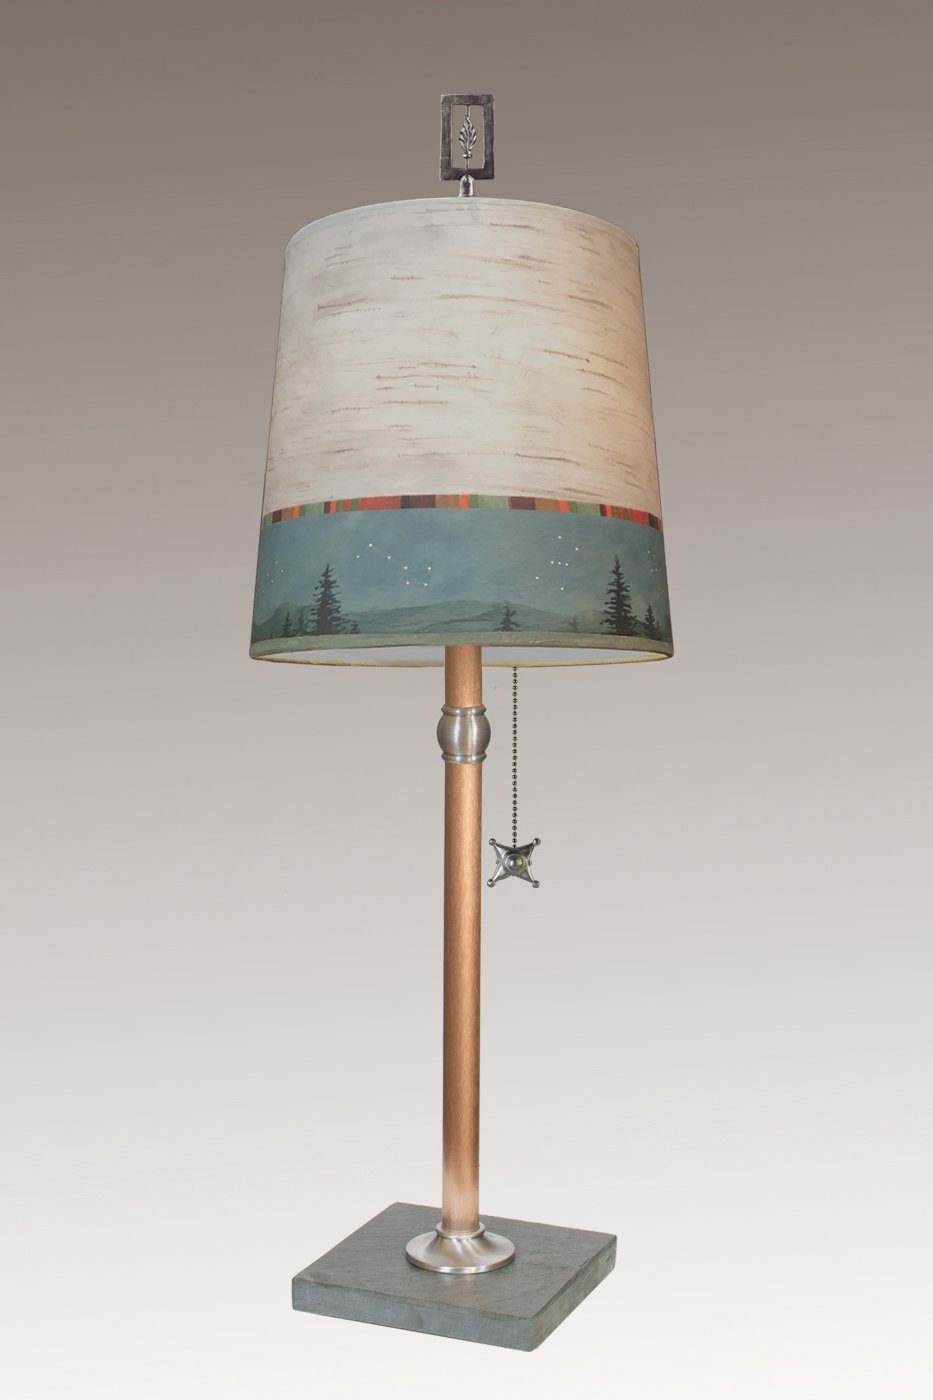 Copper Table Lamp with Medium Drum Shade in Birch Midnight